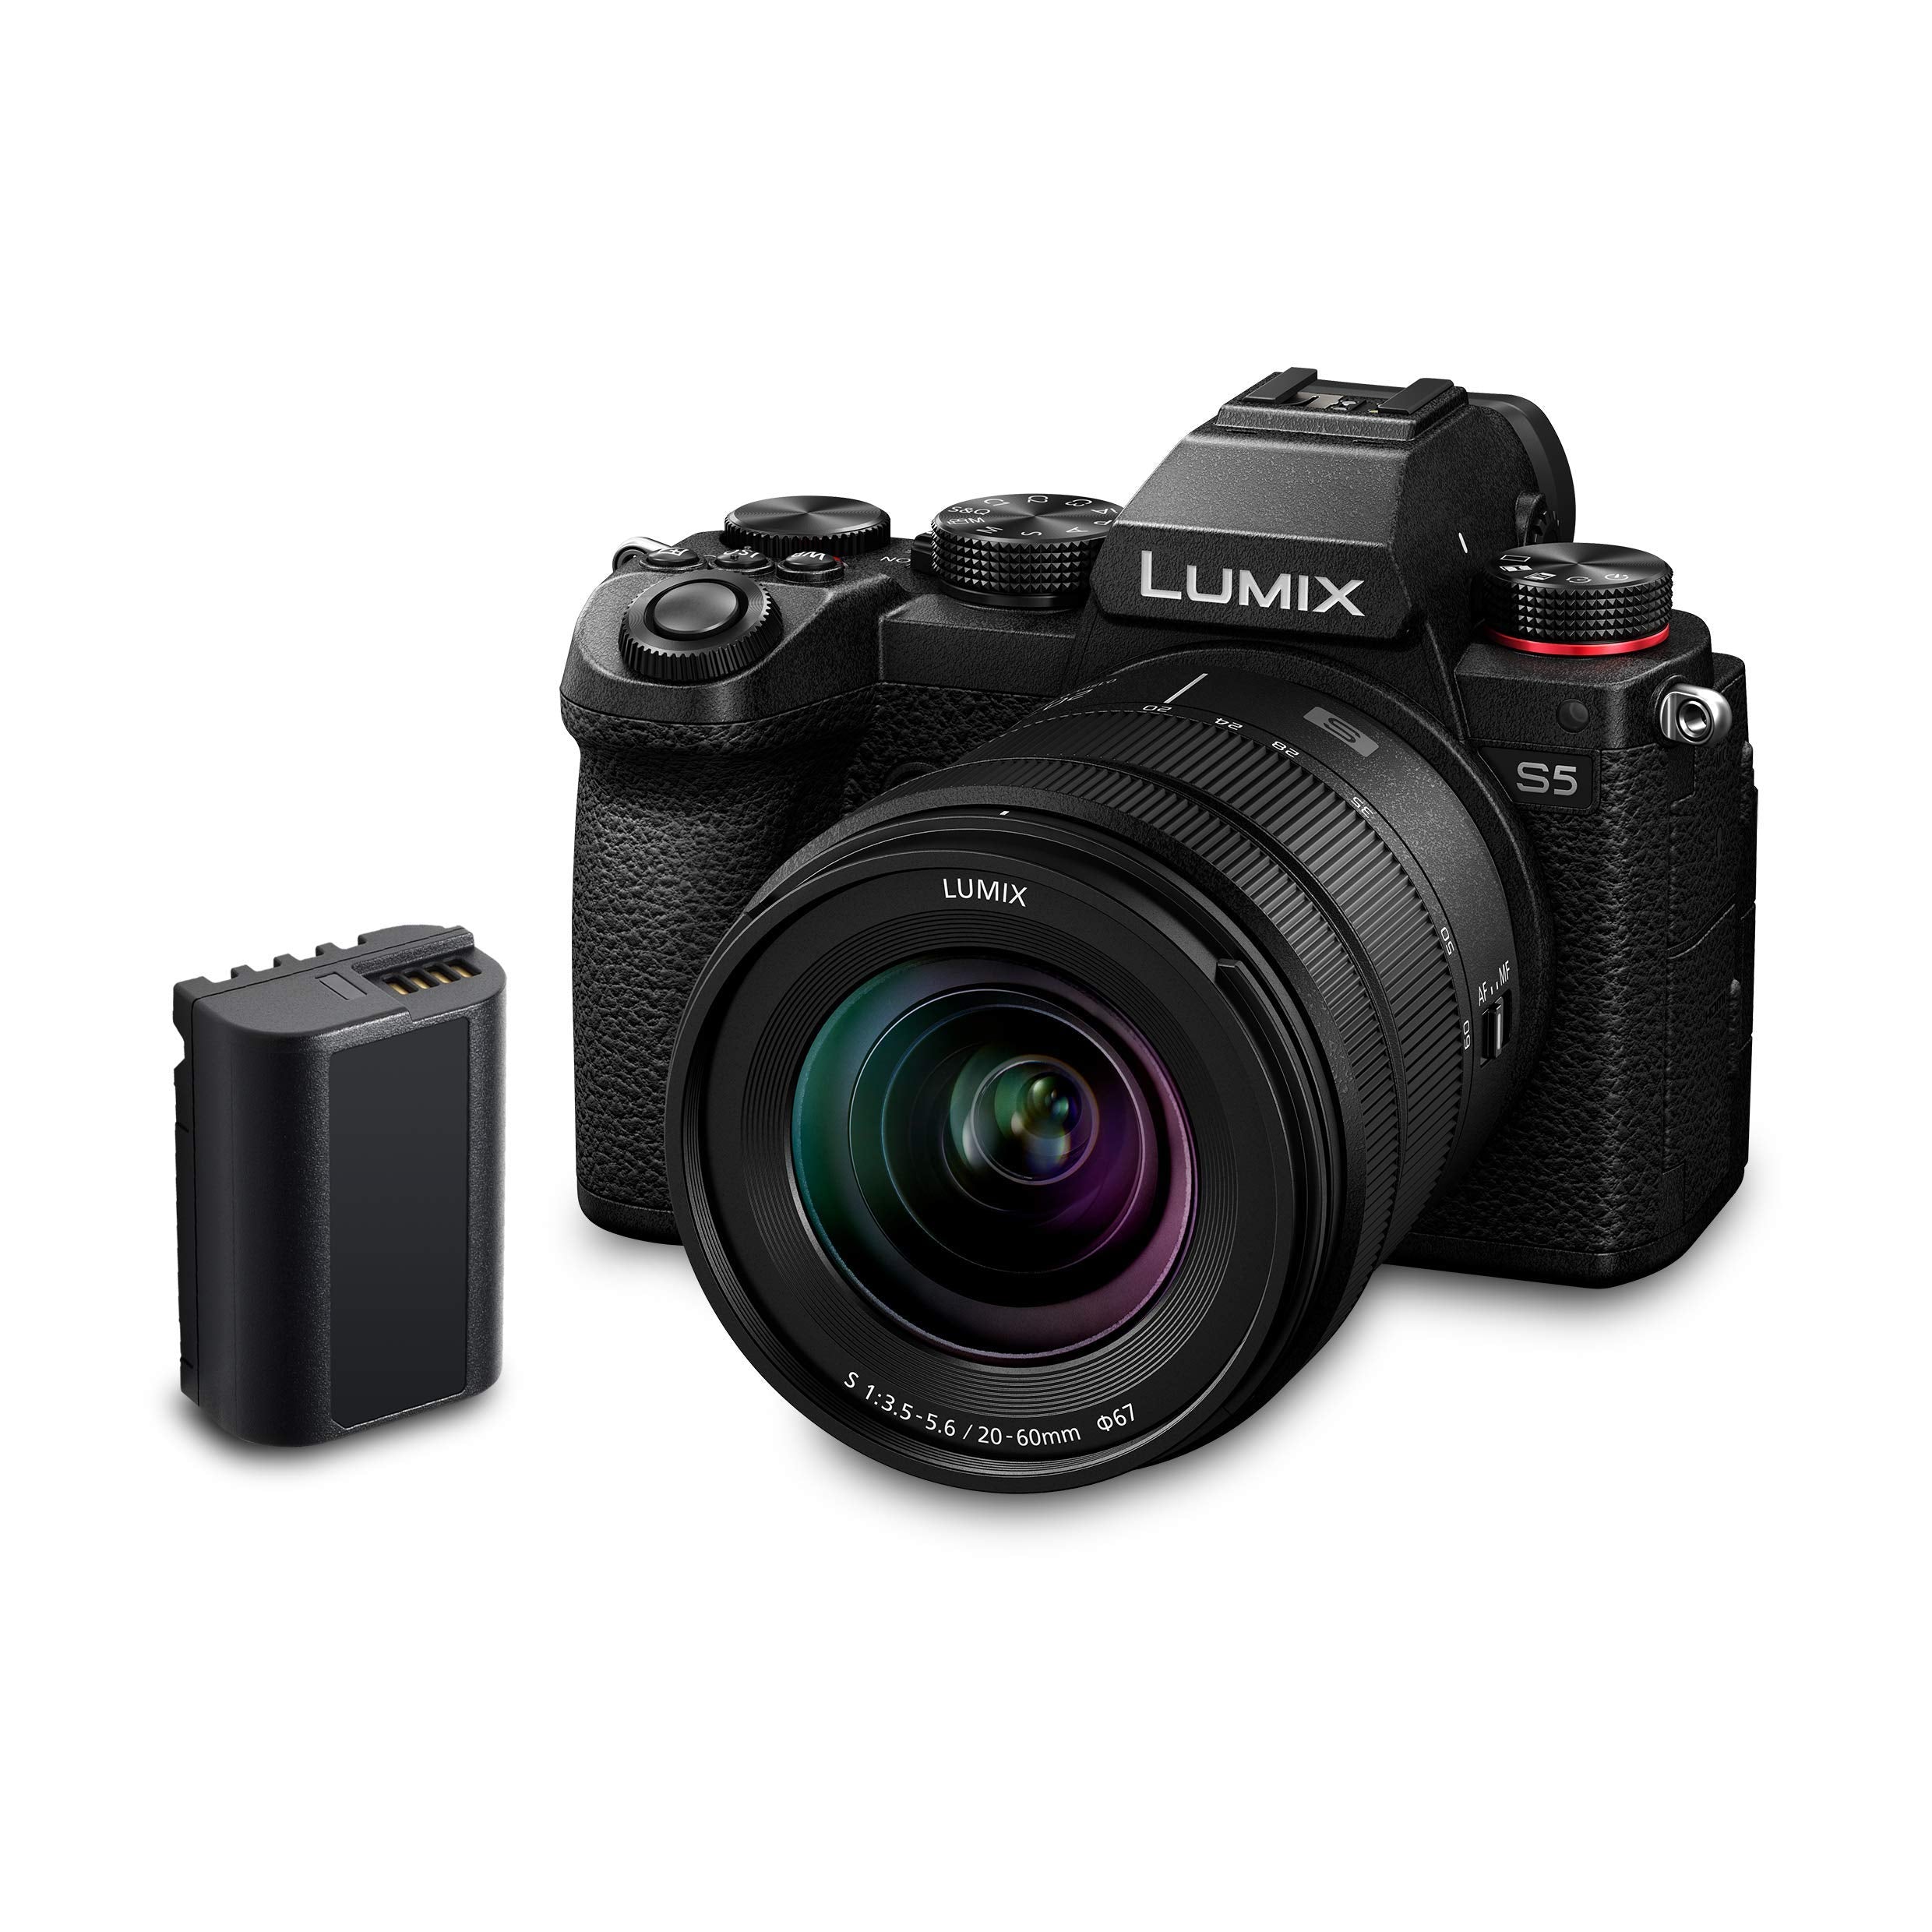 Panasonic LUMIX DC-S5 S5 Full Frame Mirrorless Camera body, 4K 60P Video Recording with Flip Screen and Wi-Fi, 20-60 mm Lens, 5-Axis Dual I.S, (Black), Plus Additional Battery Pack